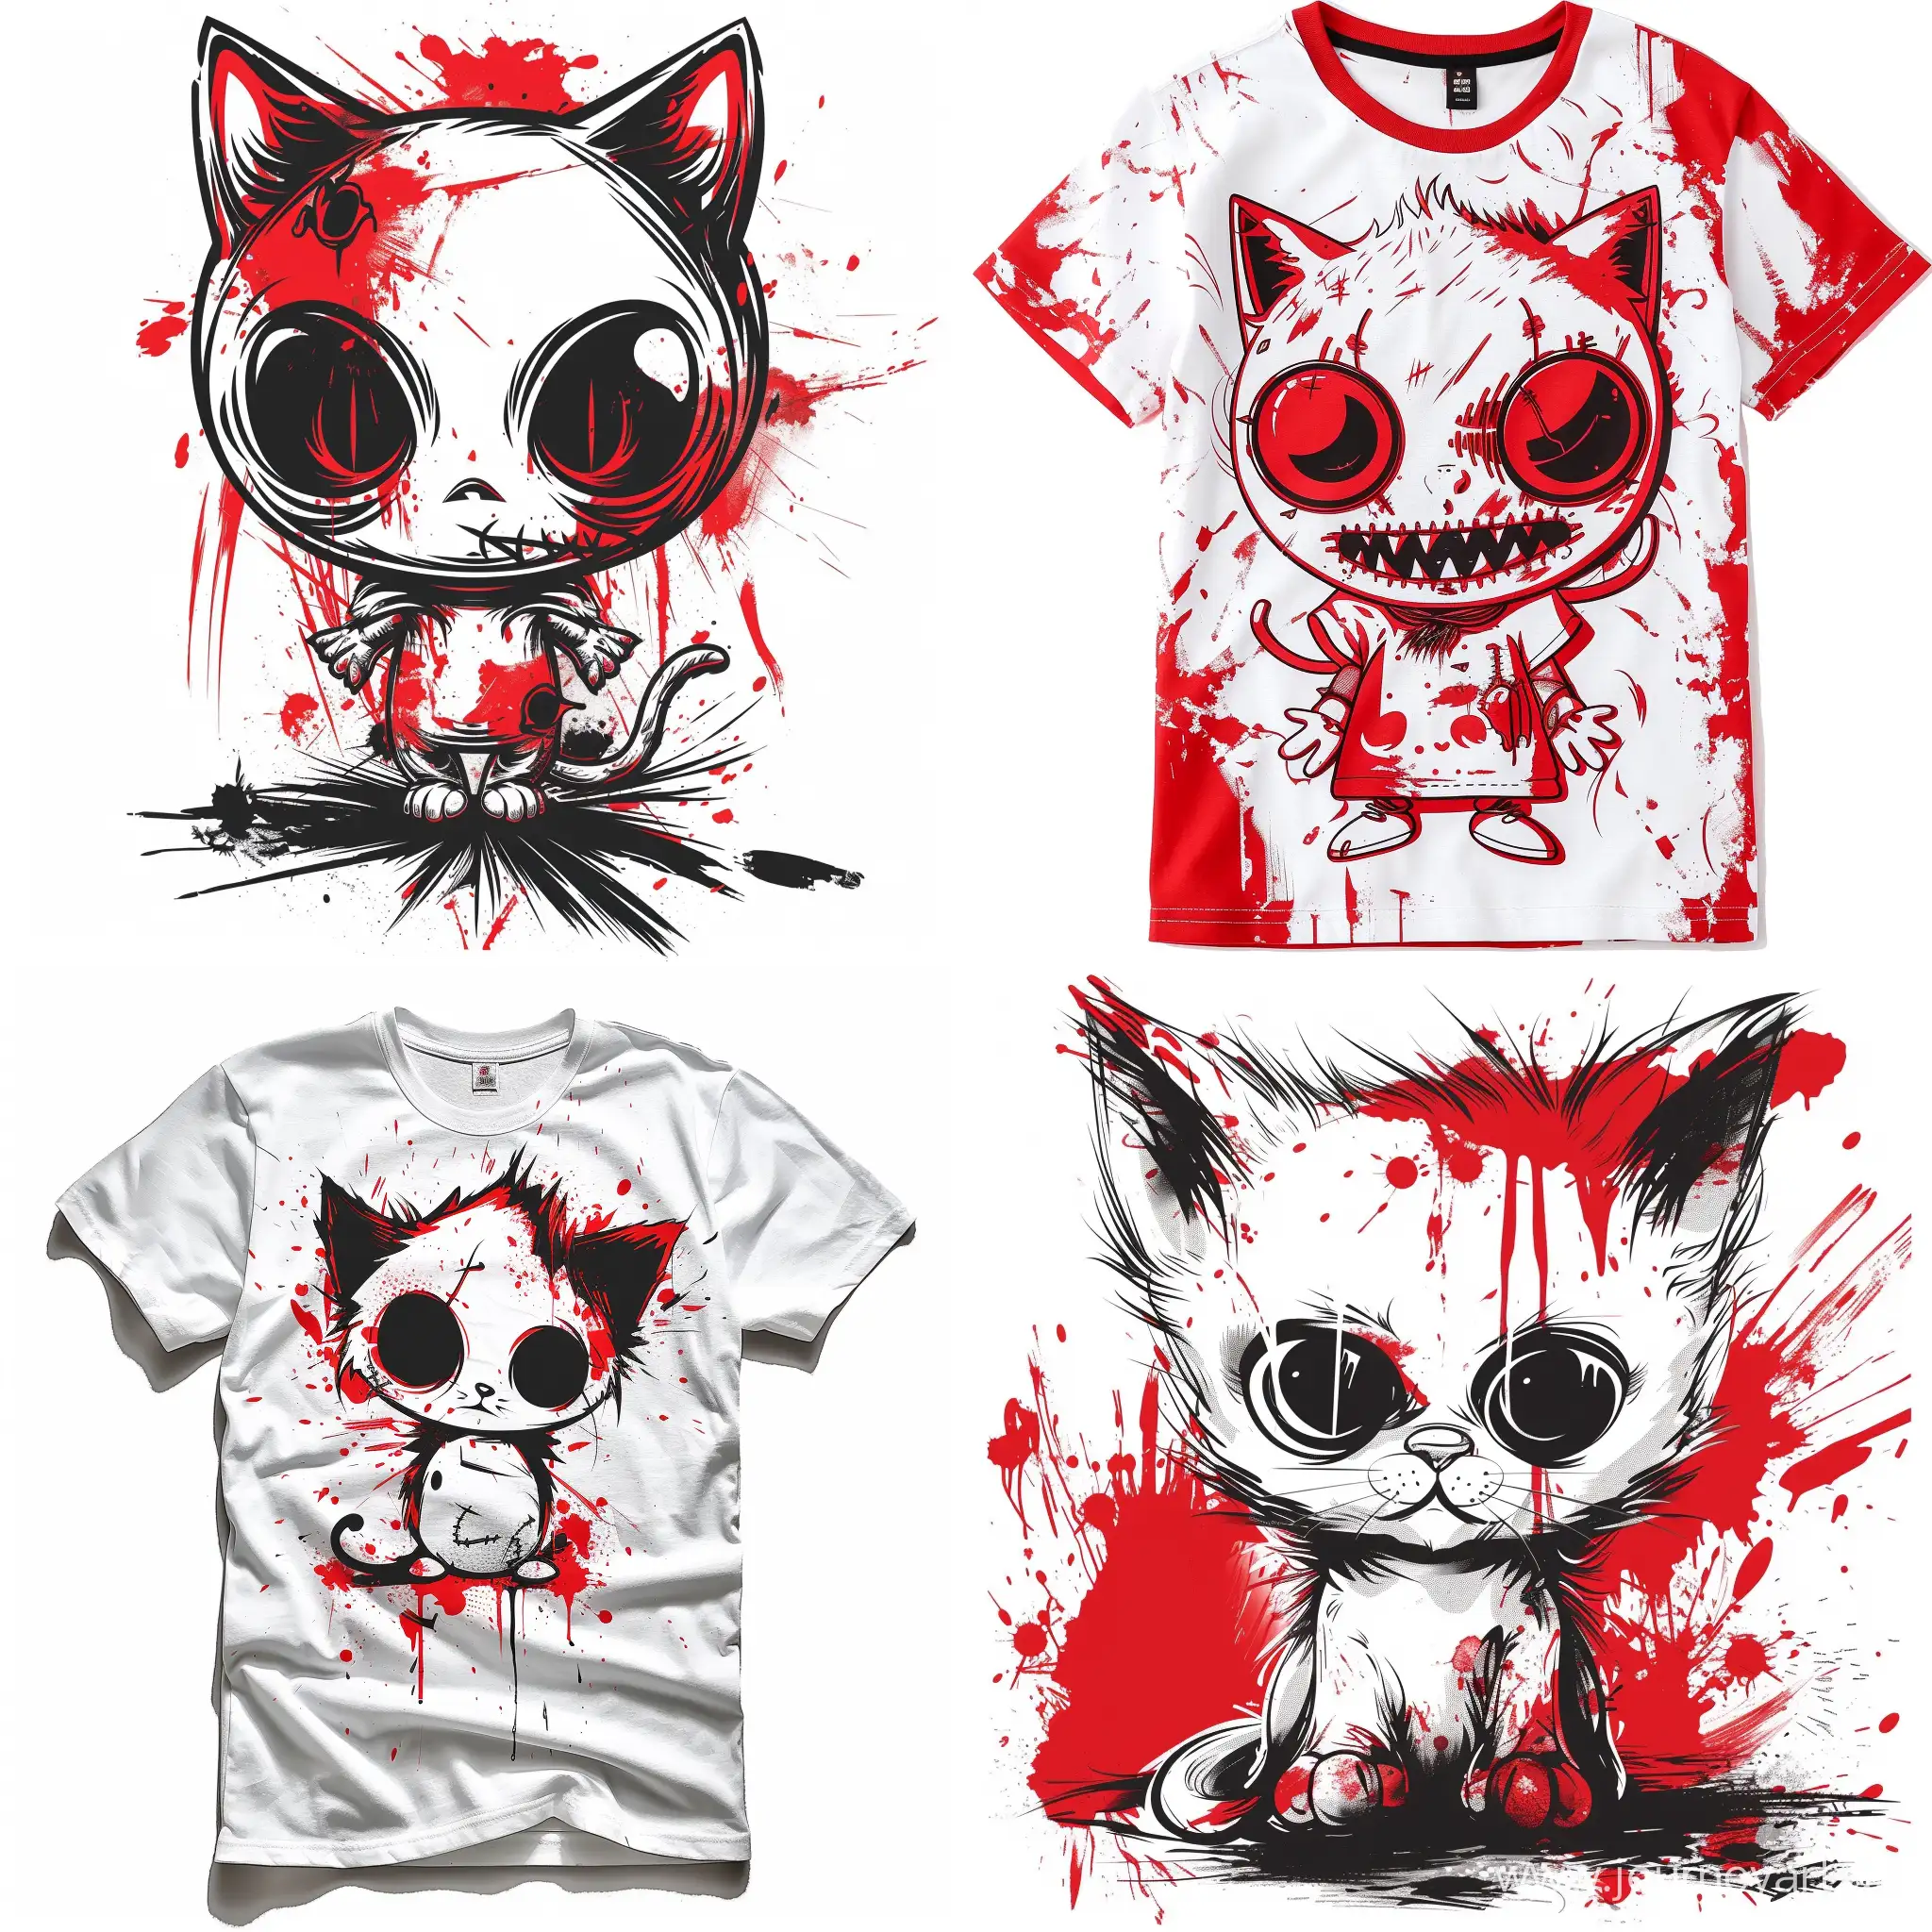 Punk design t-shirt with killer cat doll, cartoon, red and white tones, raw, drawing, white background.